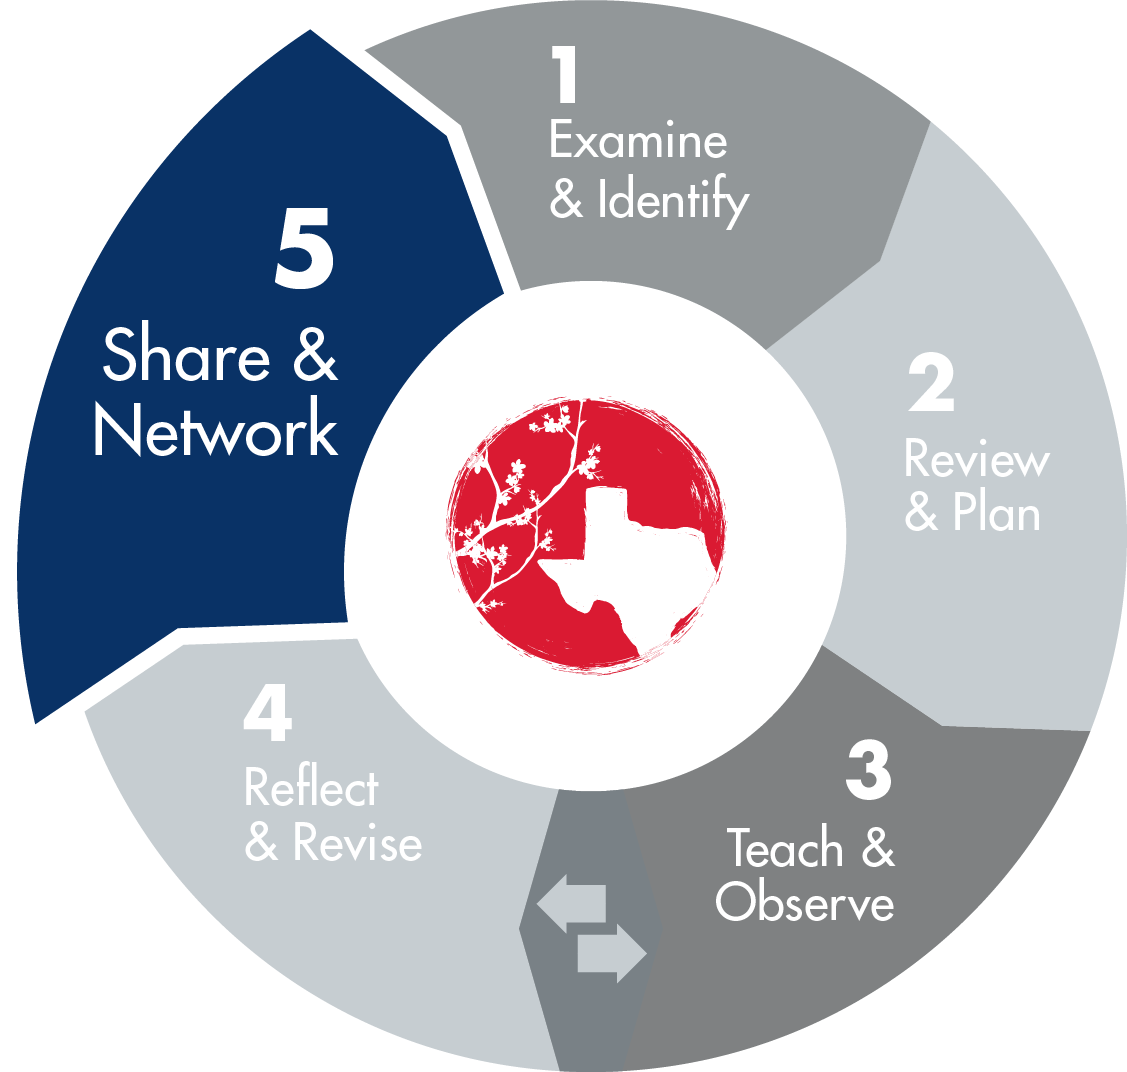 TEXAS LESSON STUDY  5 PHASES - 1. Examine & Identify, 2. Review & Plan, 3. Teach & Observe, 4. Reflect & Revise and 5. Share & Network,  where phase 5 is visually selected